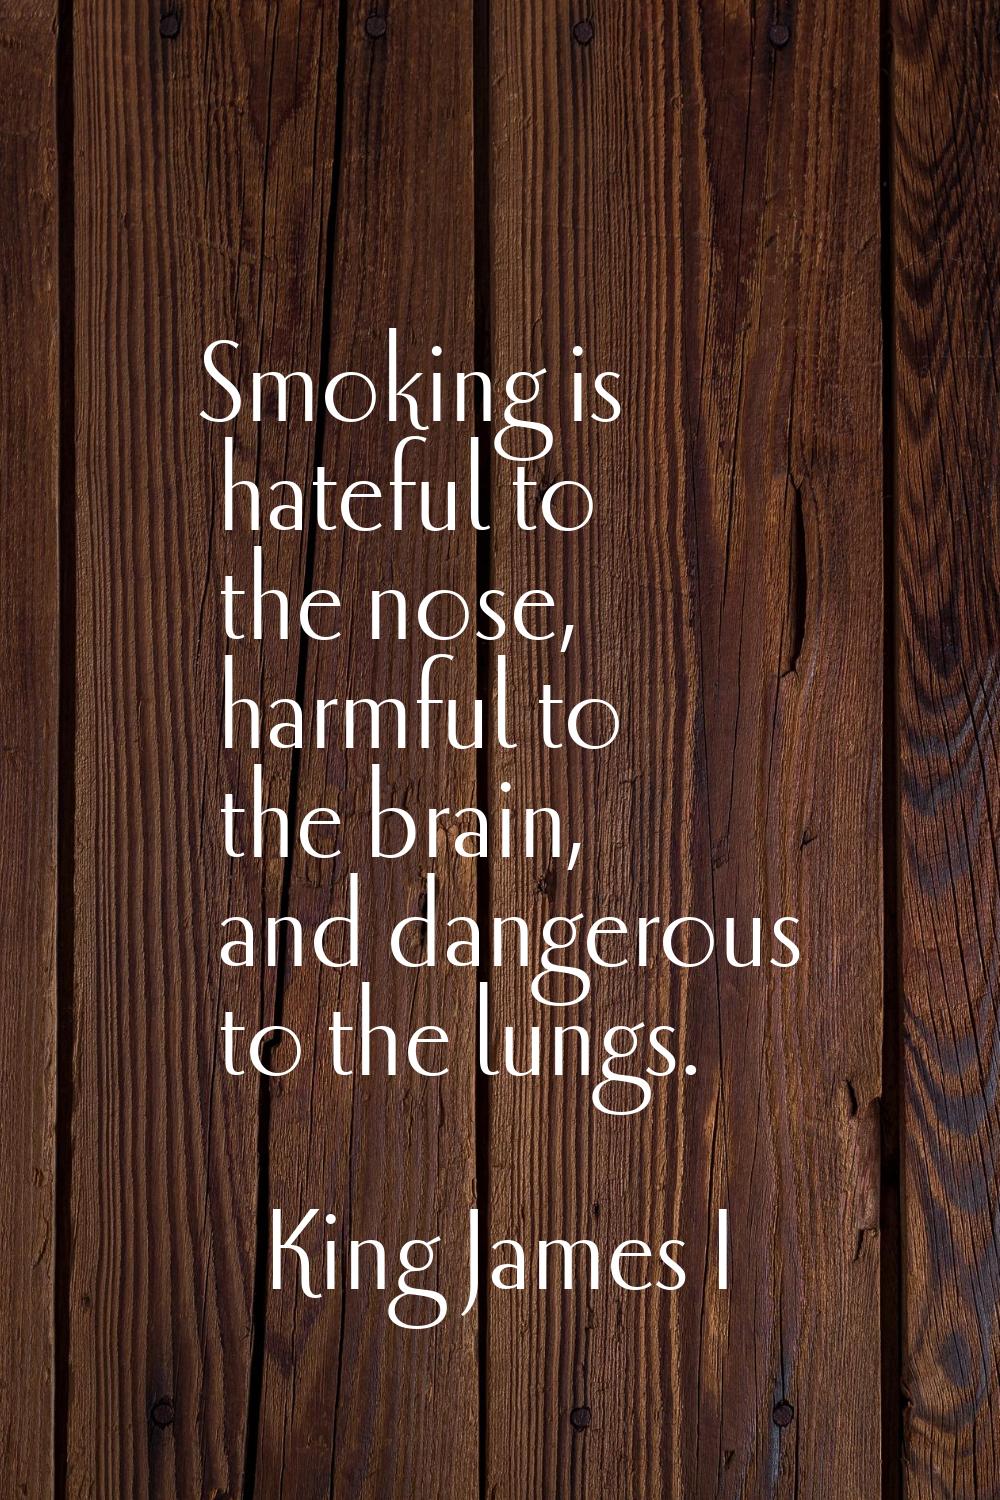 Smoking is hateful to the nose, harmful to the brain, and dangerous to the lungs.